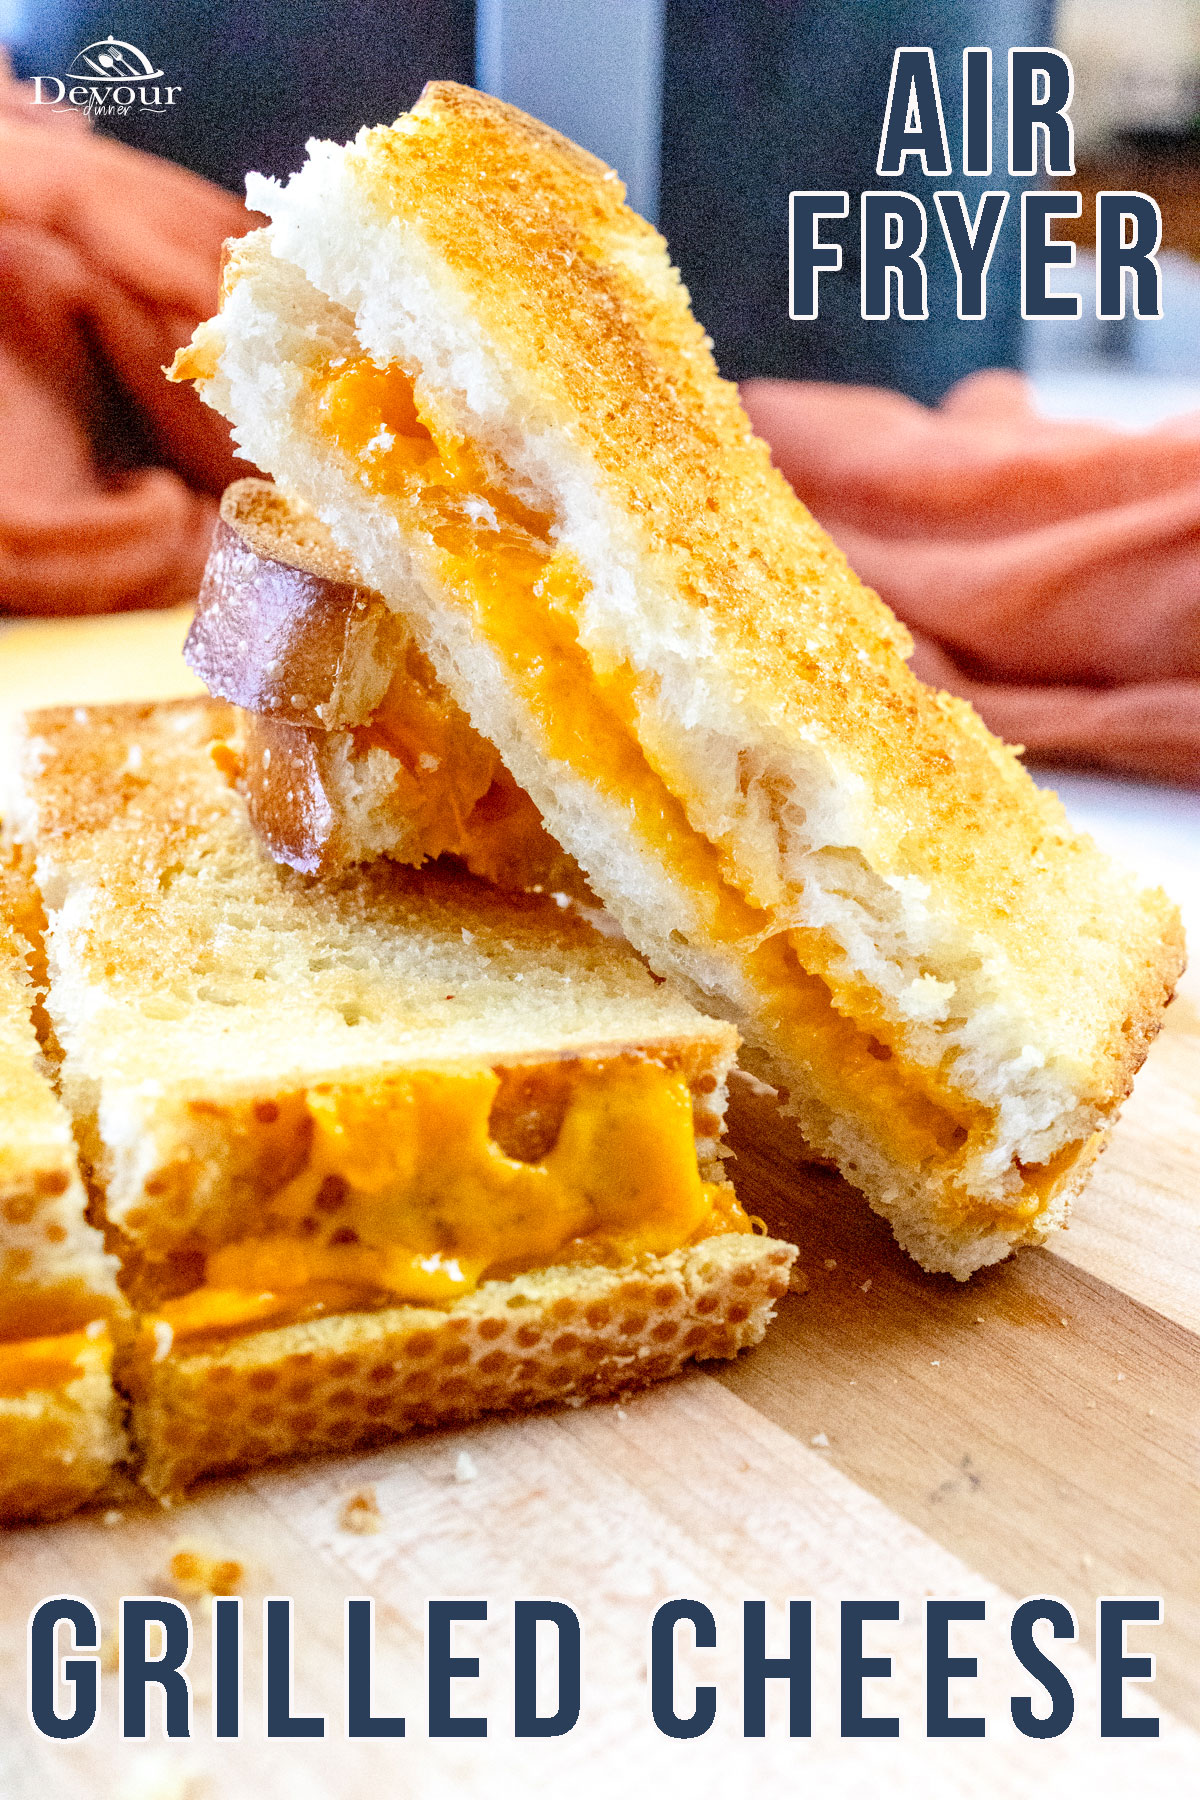 These perfectly toasted Air Fryer Grilled Cheese Sandwiches are crisp on the outside and super gooey on the inside! Coated in butter and packed with yummy cheese, they're great for brunch, lunch, or a light dinner!